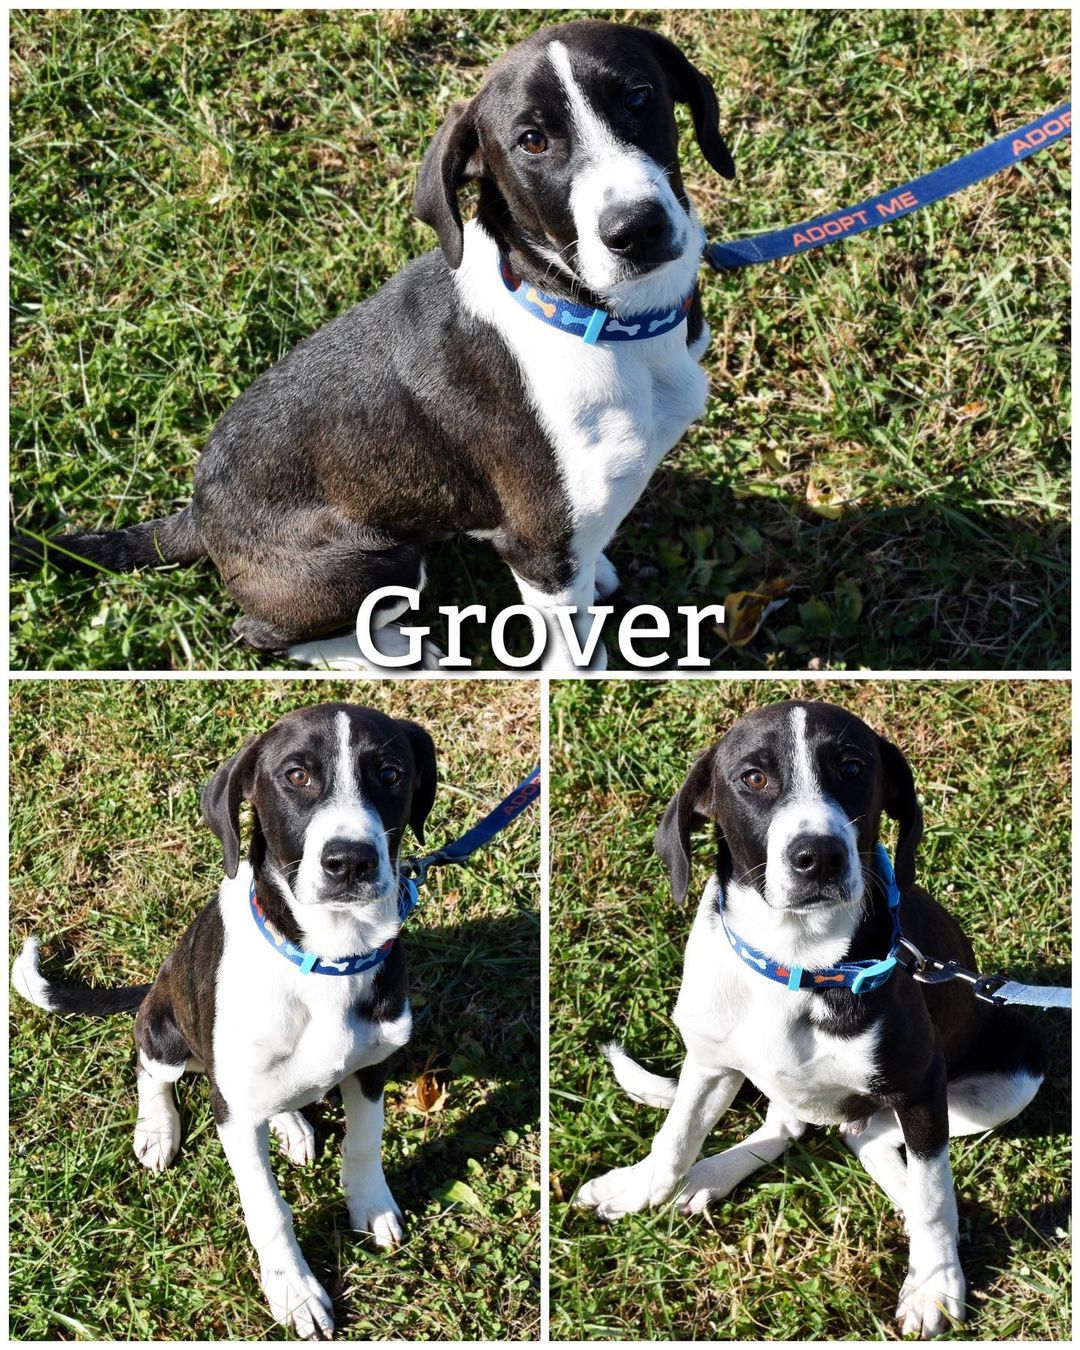 Meet Grover!
Grover is a sweet, loving, and energetic 4-5 month old Great Dane mix puppy looking for his forever home! He loves to play, get belly rubs and attention from everyone he meets. Grover is ready to go home and can’t wait to meet his forever family!

Grover is neutered, up to date on vaccinations, dewormed, and current on flea/tick preventatives. 

Grover’s adoption fee is $85, plus $15 for microchip